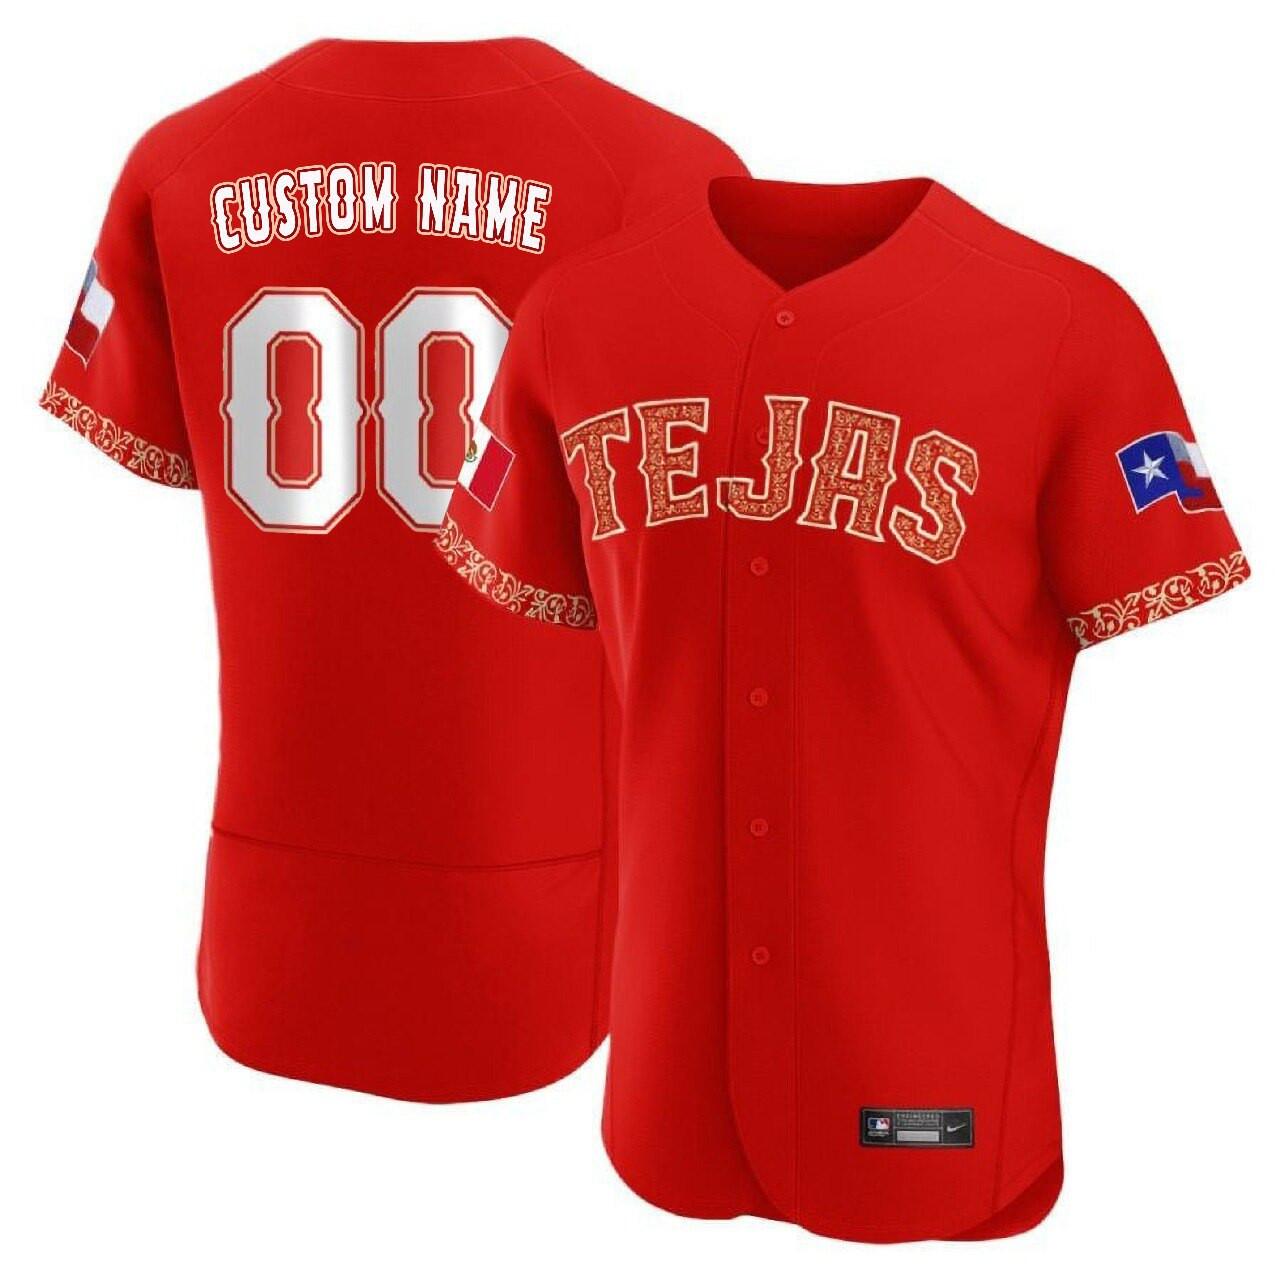 Men's Texas Rangers Customized Mexican Red Flex Base Stitched Jersey